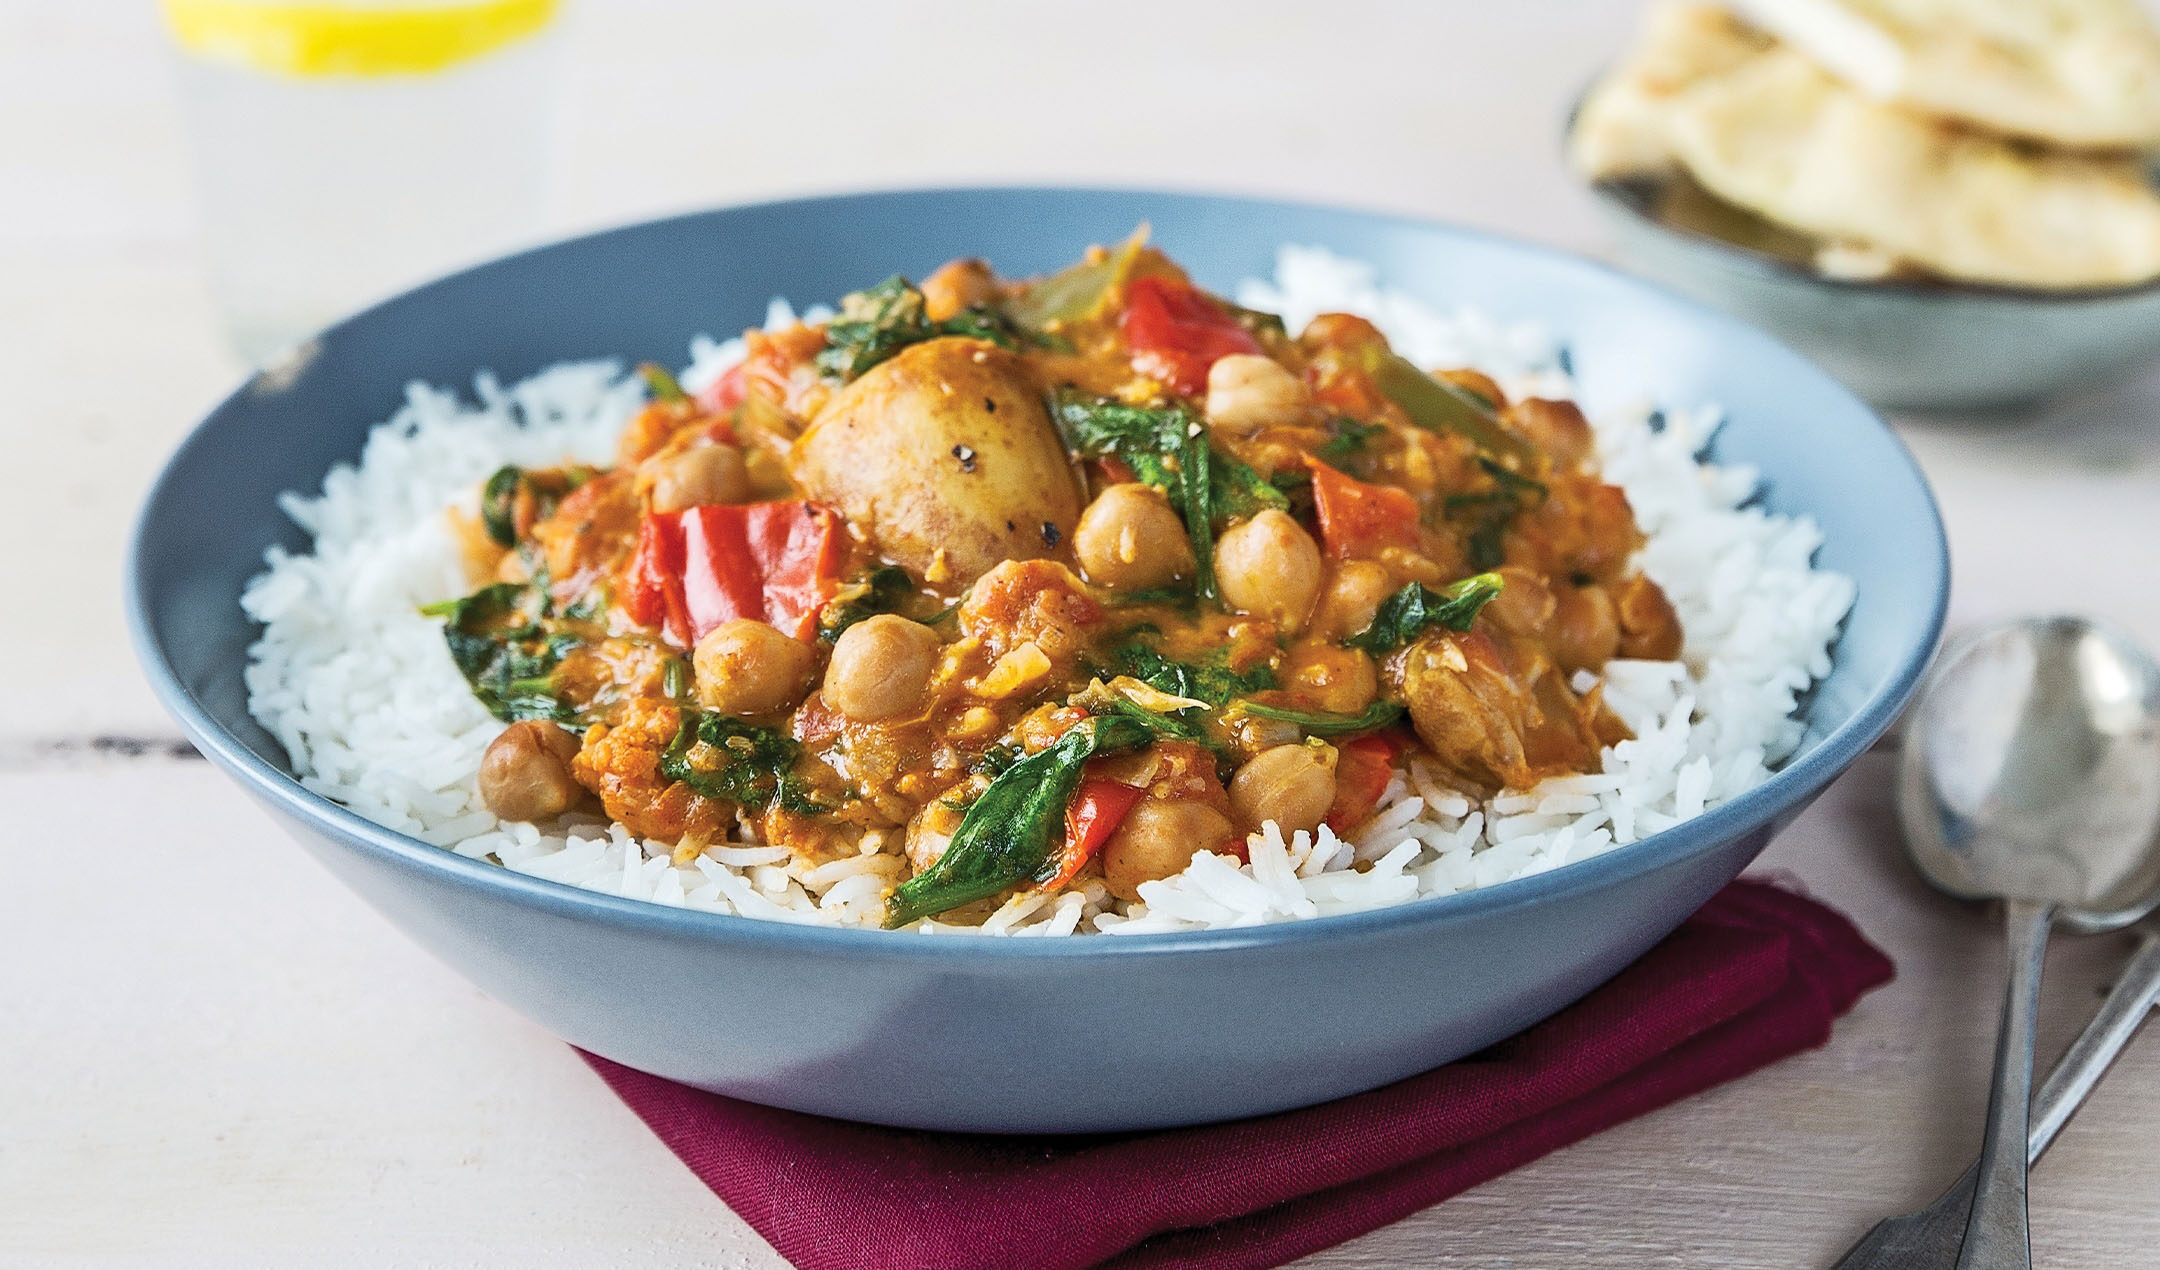 Curried vegetable and chickpea stew recipe | easyFood